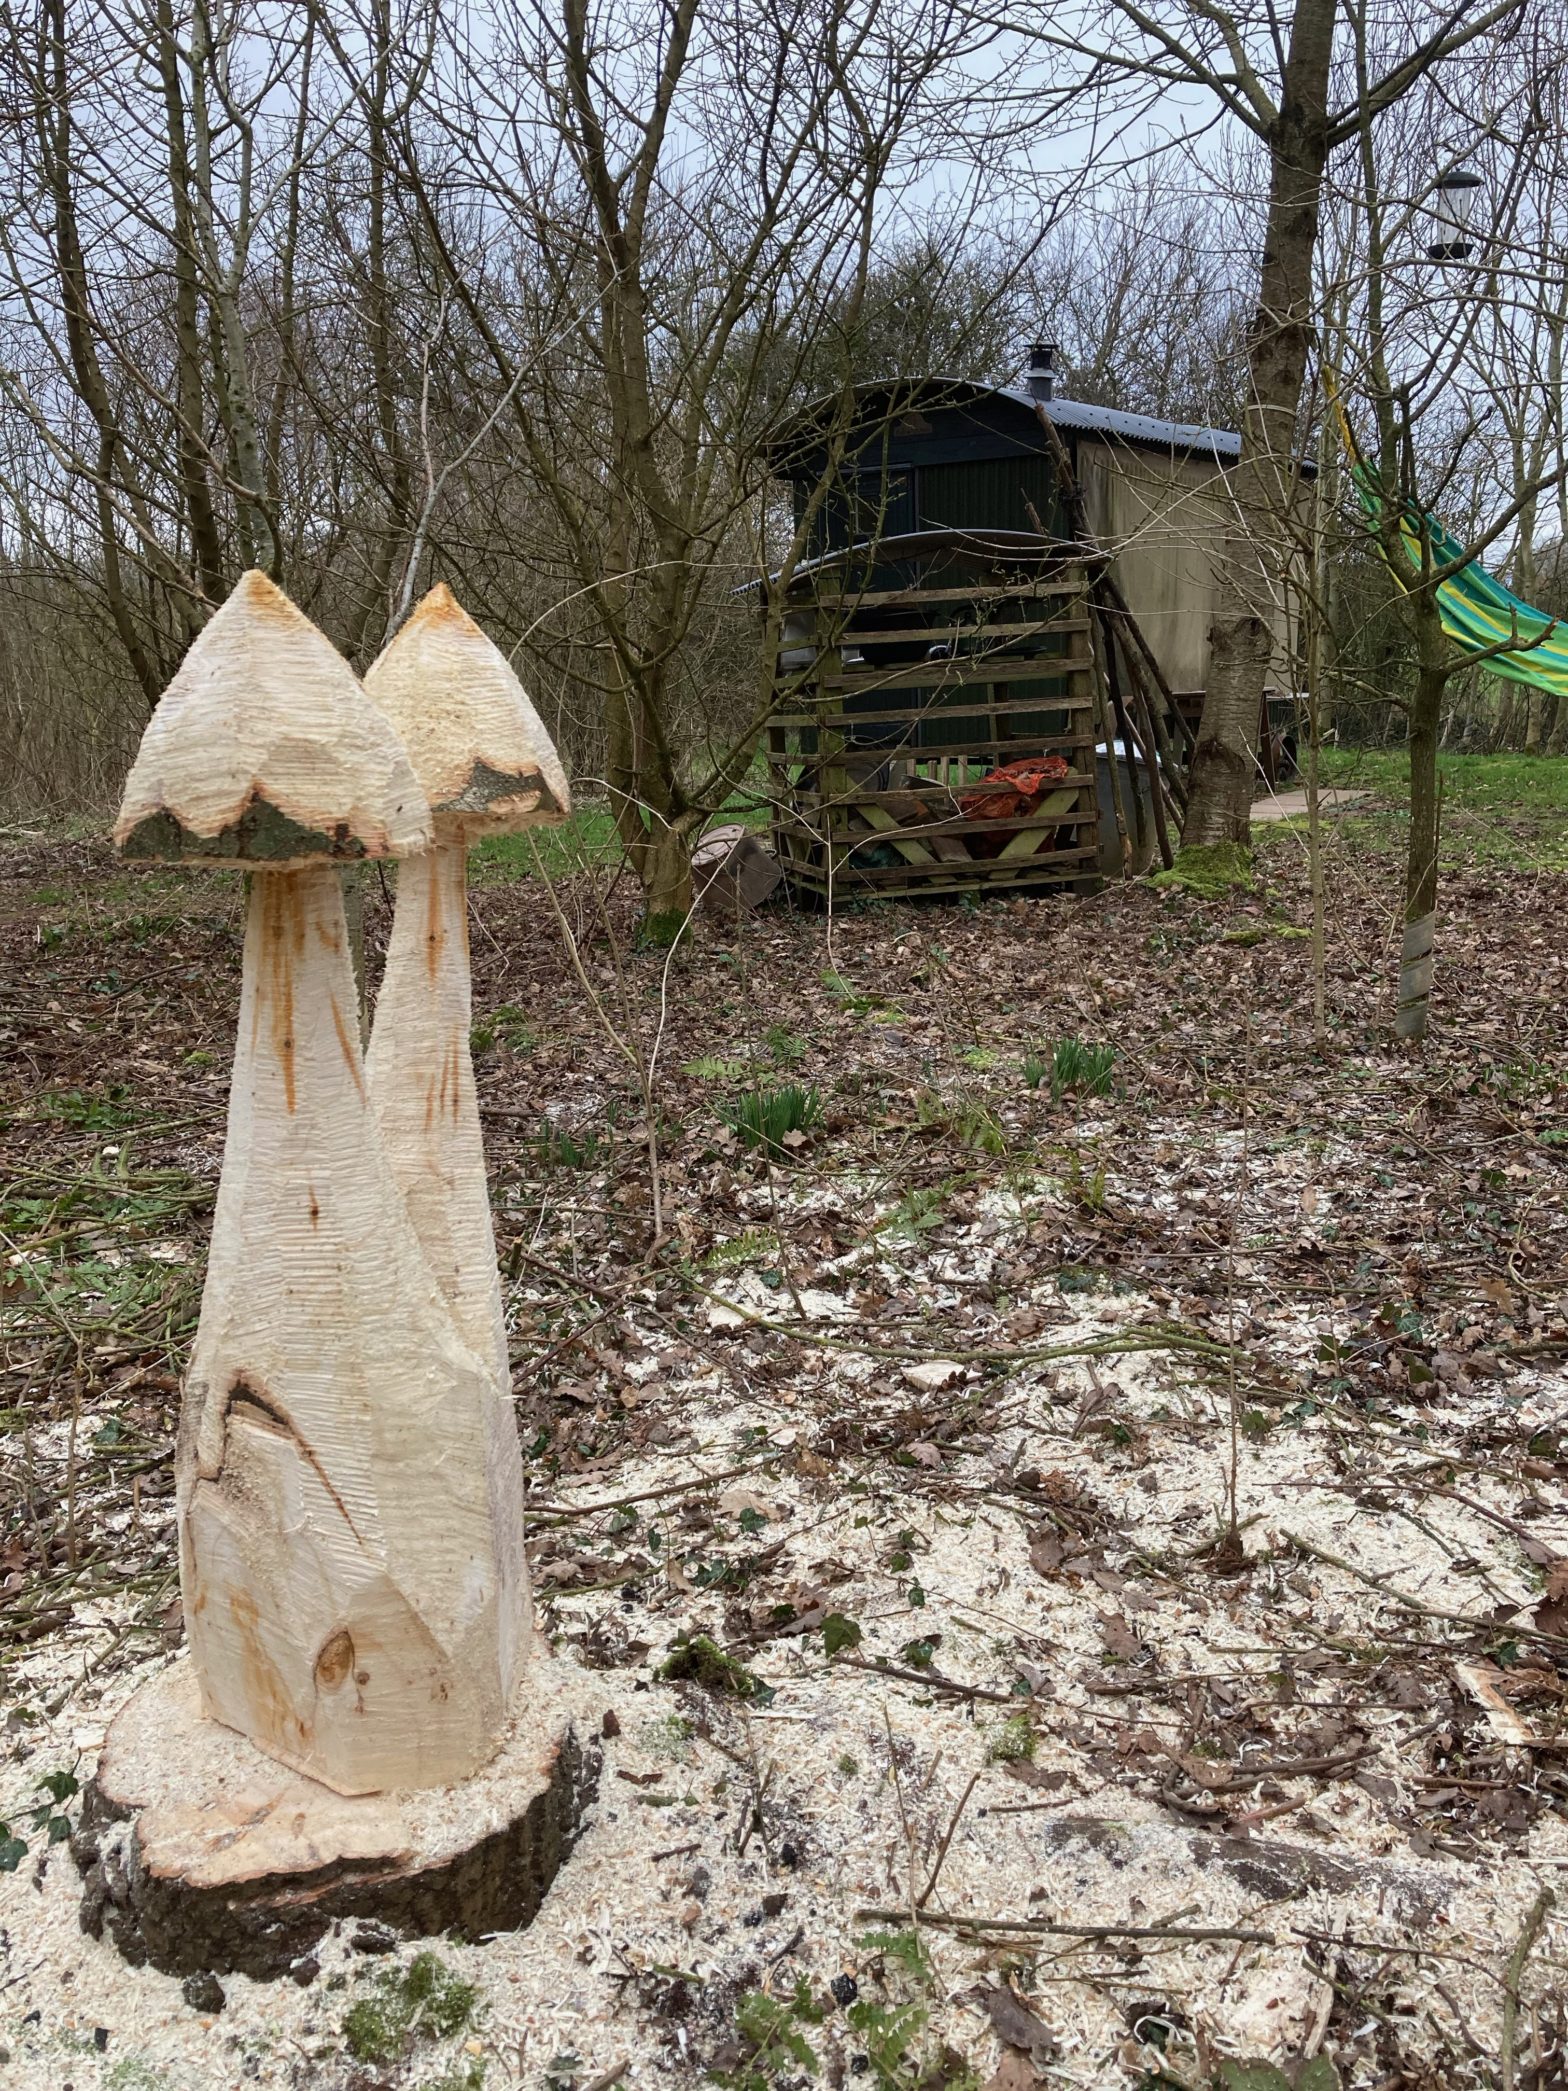 Chainsaw sculpture of toadstools